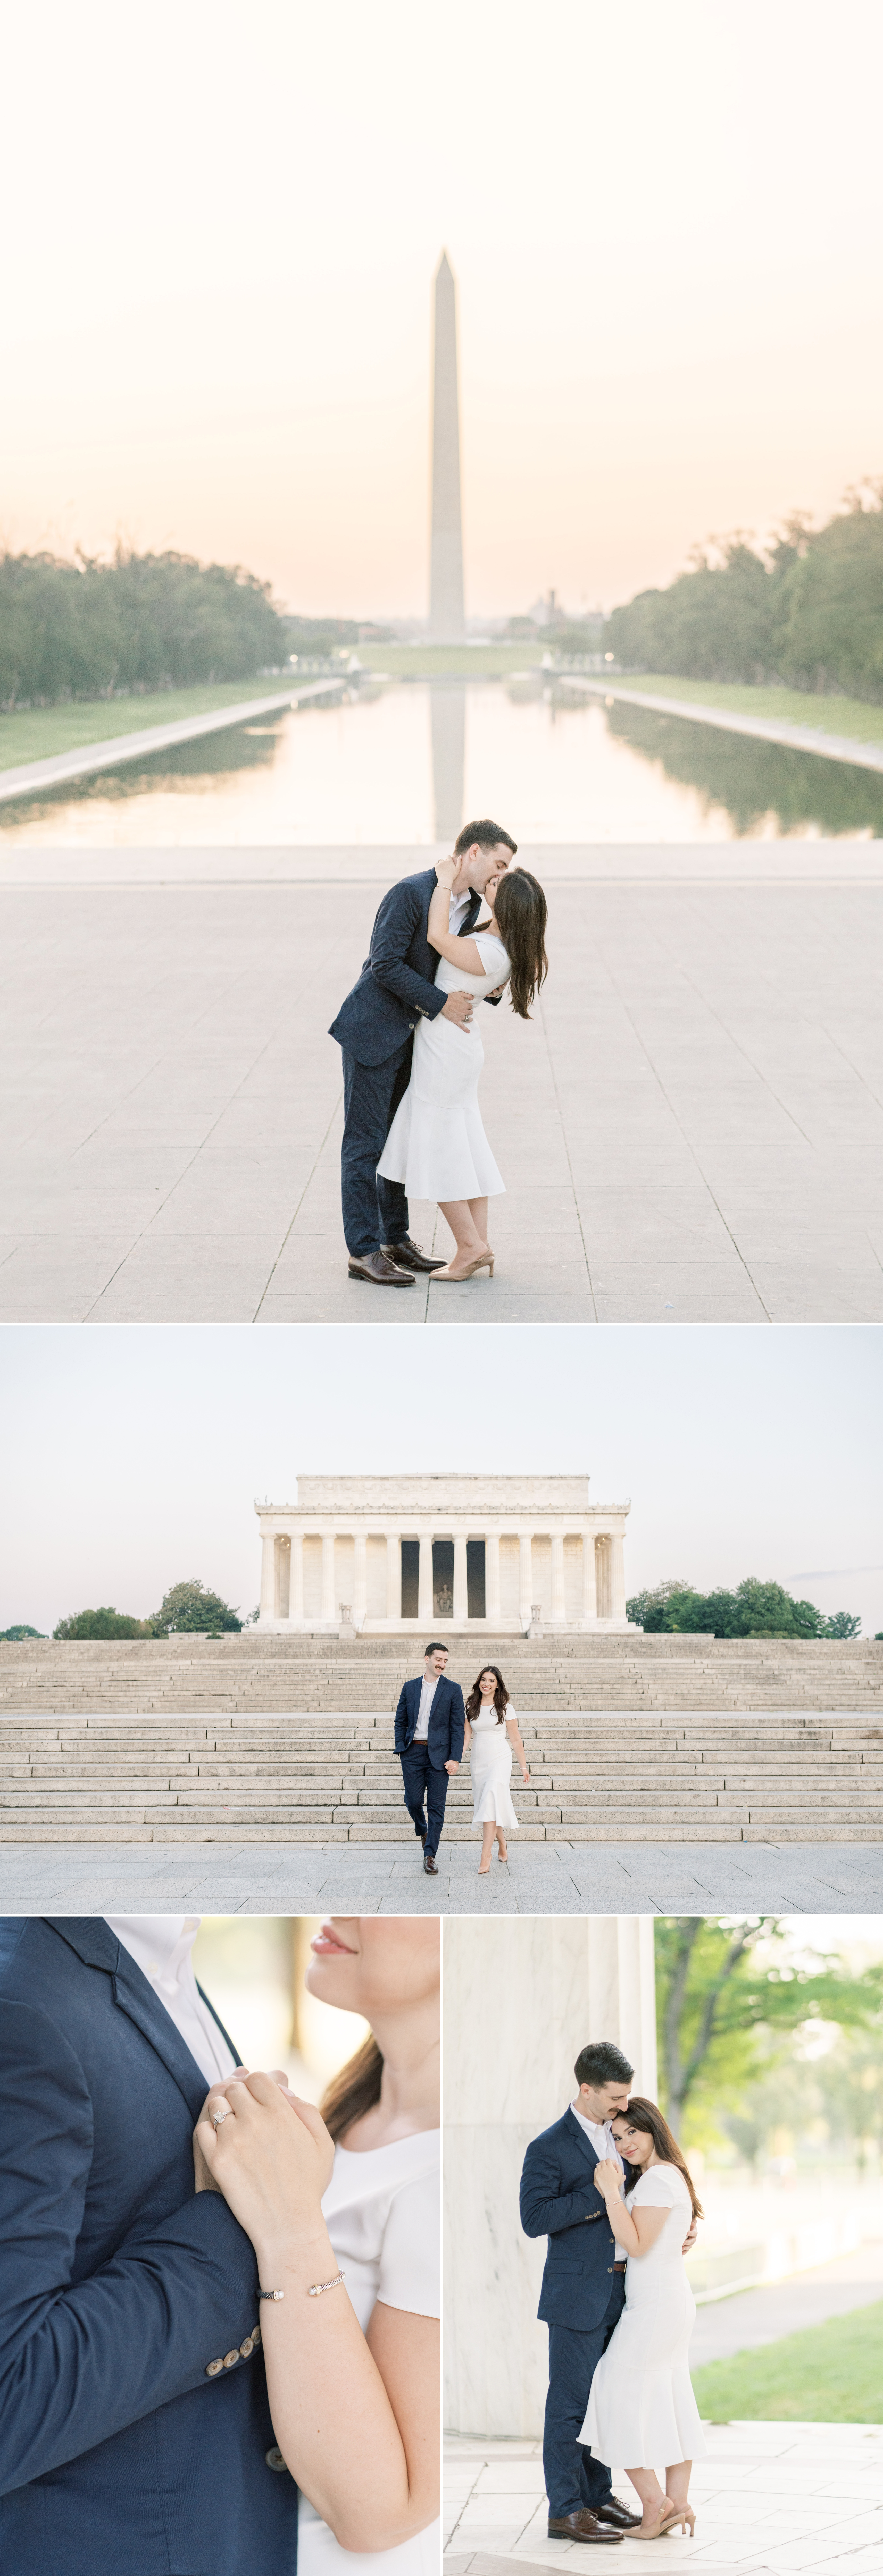 A summery engagement session at the iconic Monuments in Washington, DC including the Lincoln Memorial and Reflecting Pool.